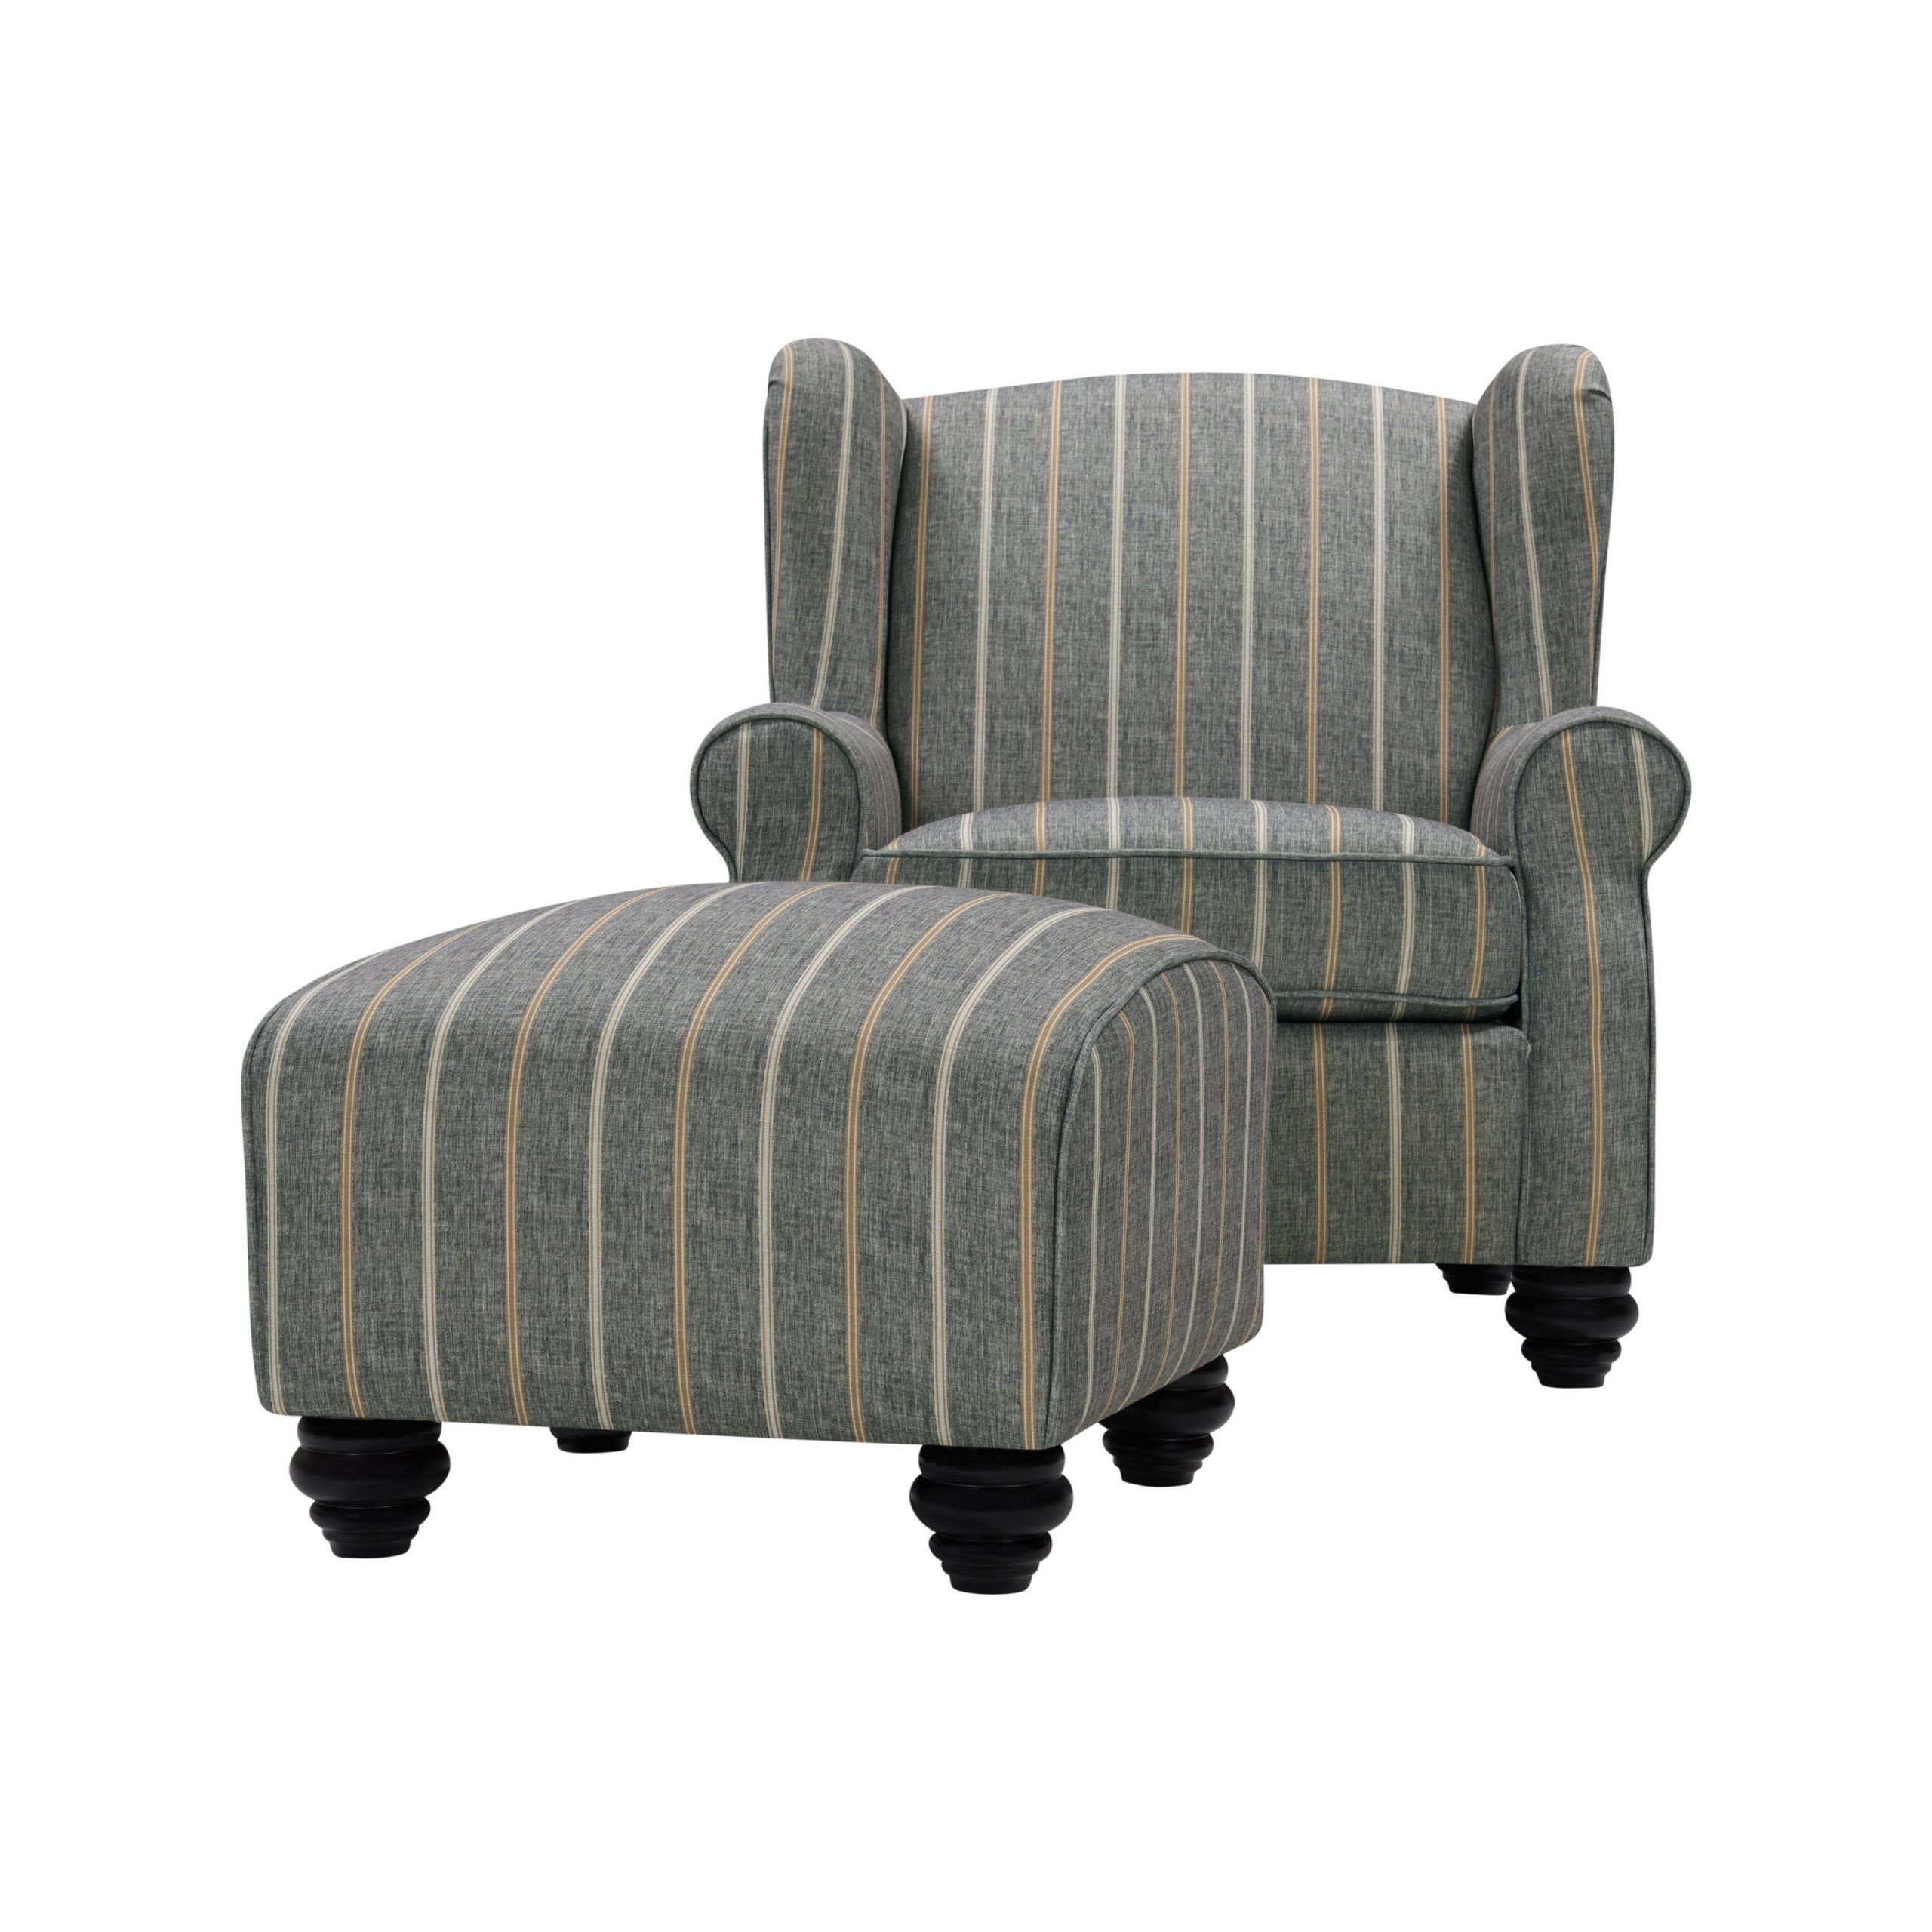 Geometric Round Arm Accent Chairs You'Ll Love In 2021 | Wayfair In Brames Barrel Chair And Ottoman Sets (Photo 6 of 15)